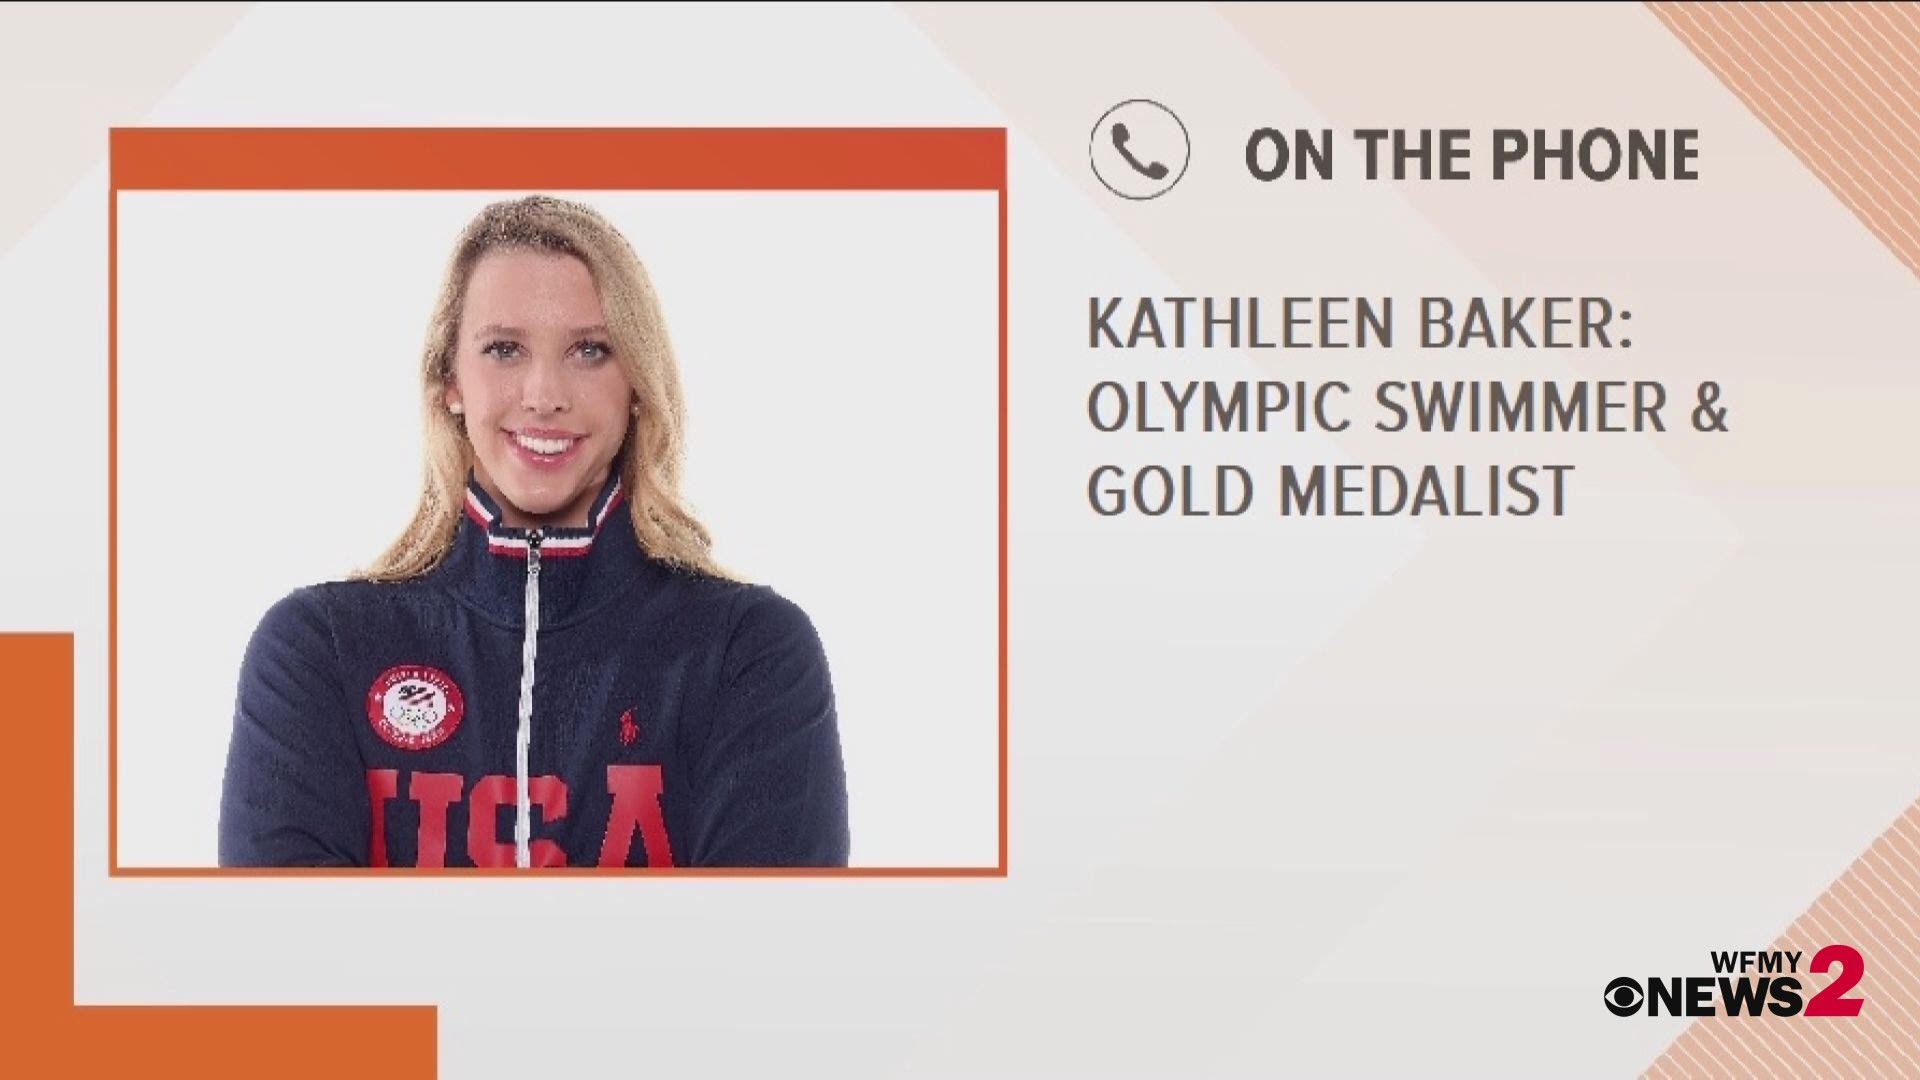 Kathleen Baker is an Olympic swimmer from Winston-Salem who lives in San Diego. She's finding ways to still train while in quarantine.